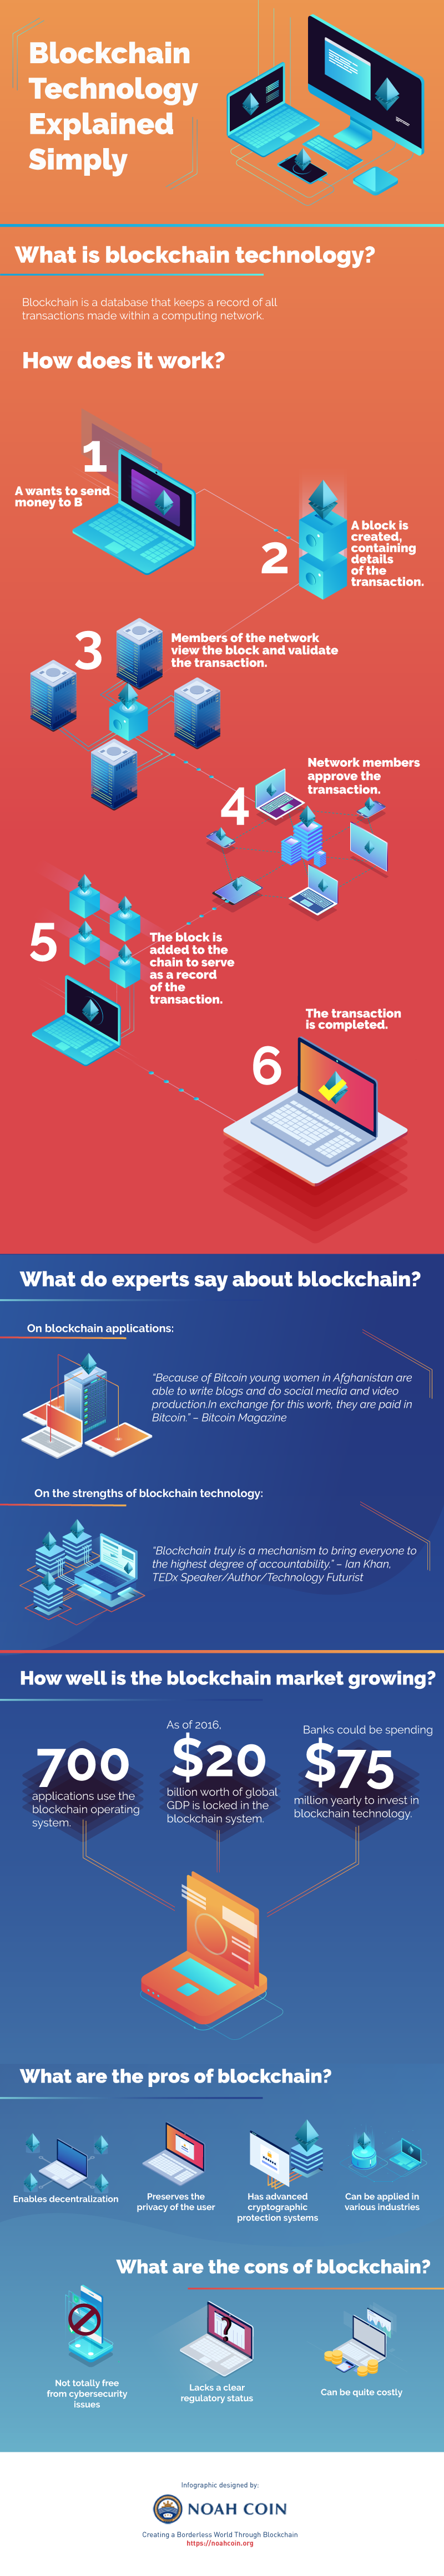 Information Blocks Joined Together in an Unbroken Chain: Blockchain Technology Made Simple - Infographic